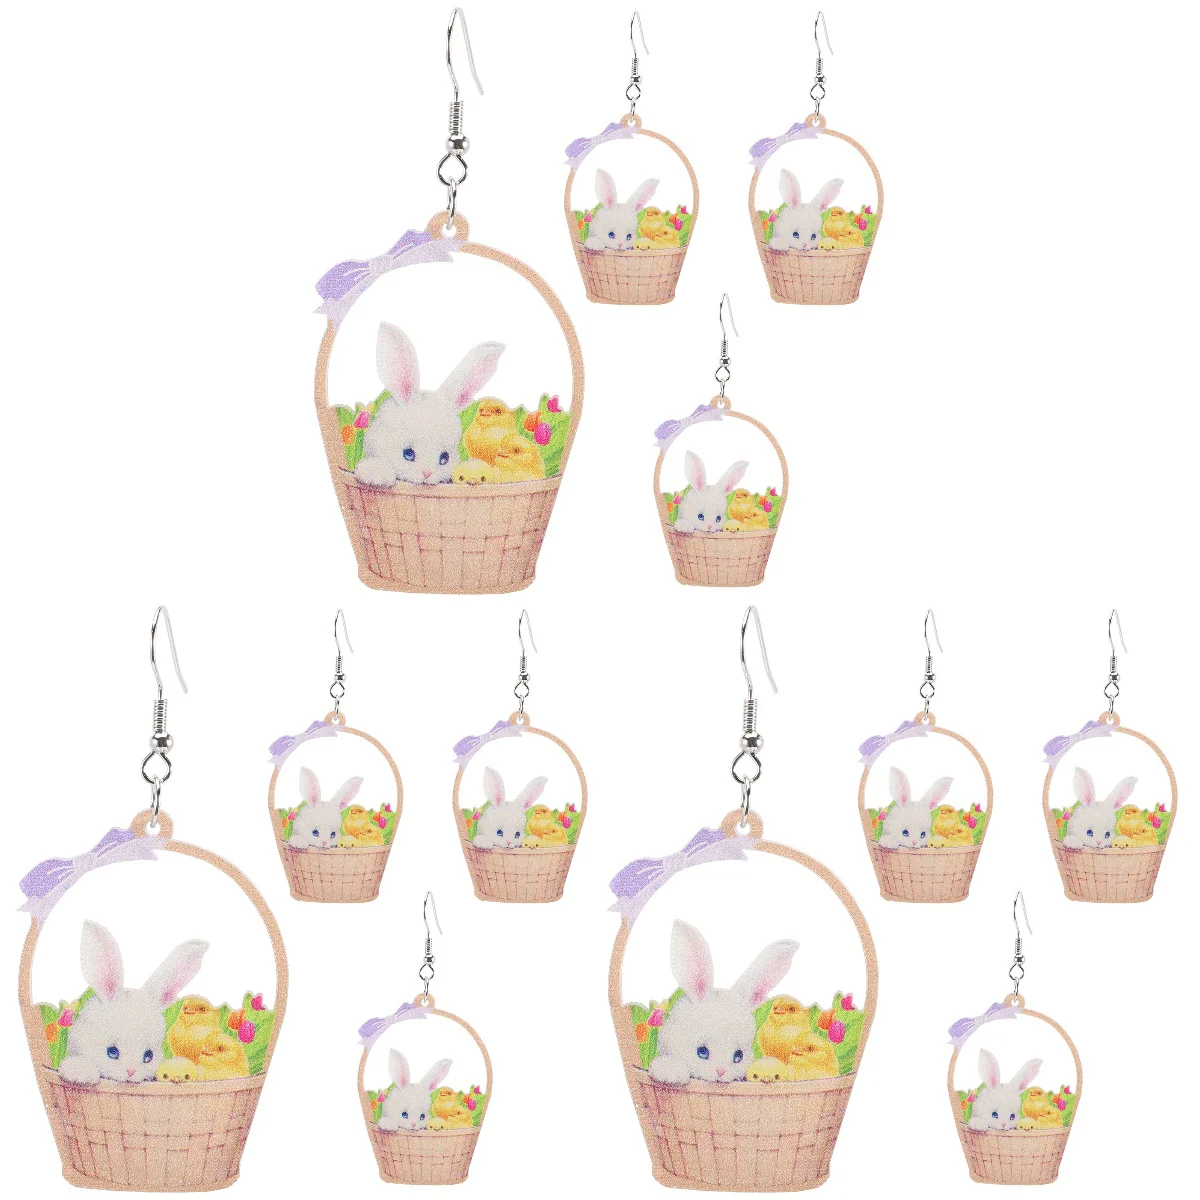 

6 Pairs Easter Earrings Easter Bunny and Chicks in a Basket Shape Ear Drop Ear Jewelry